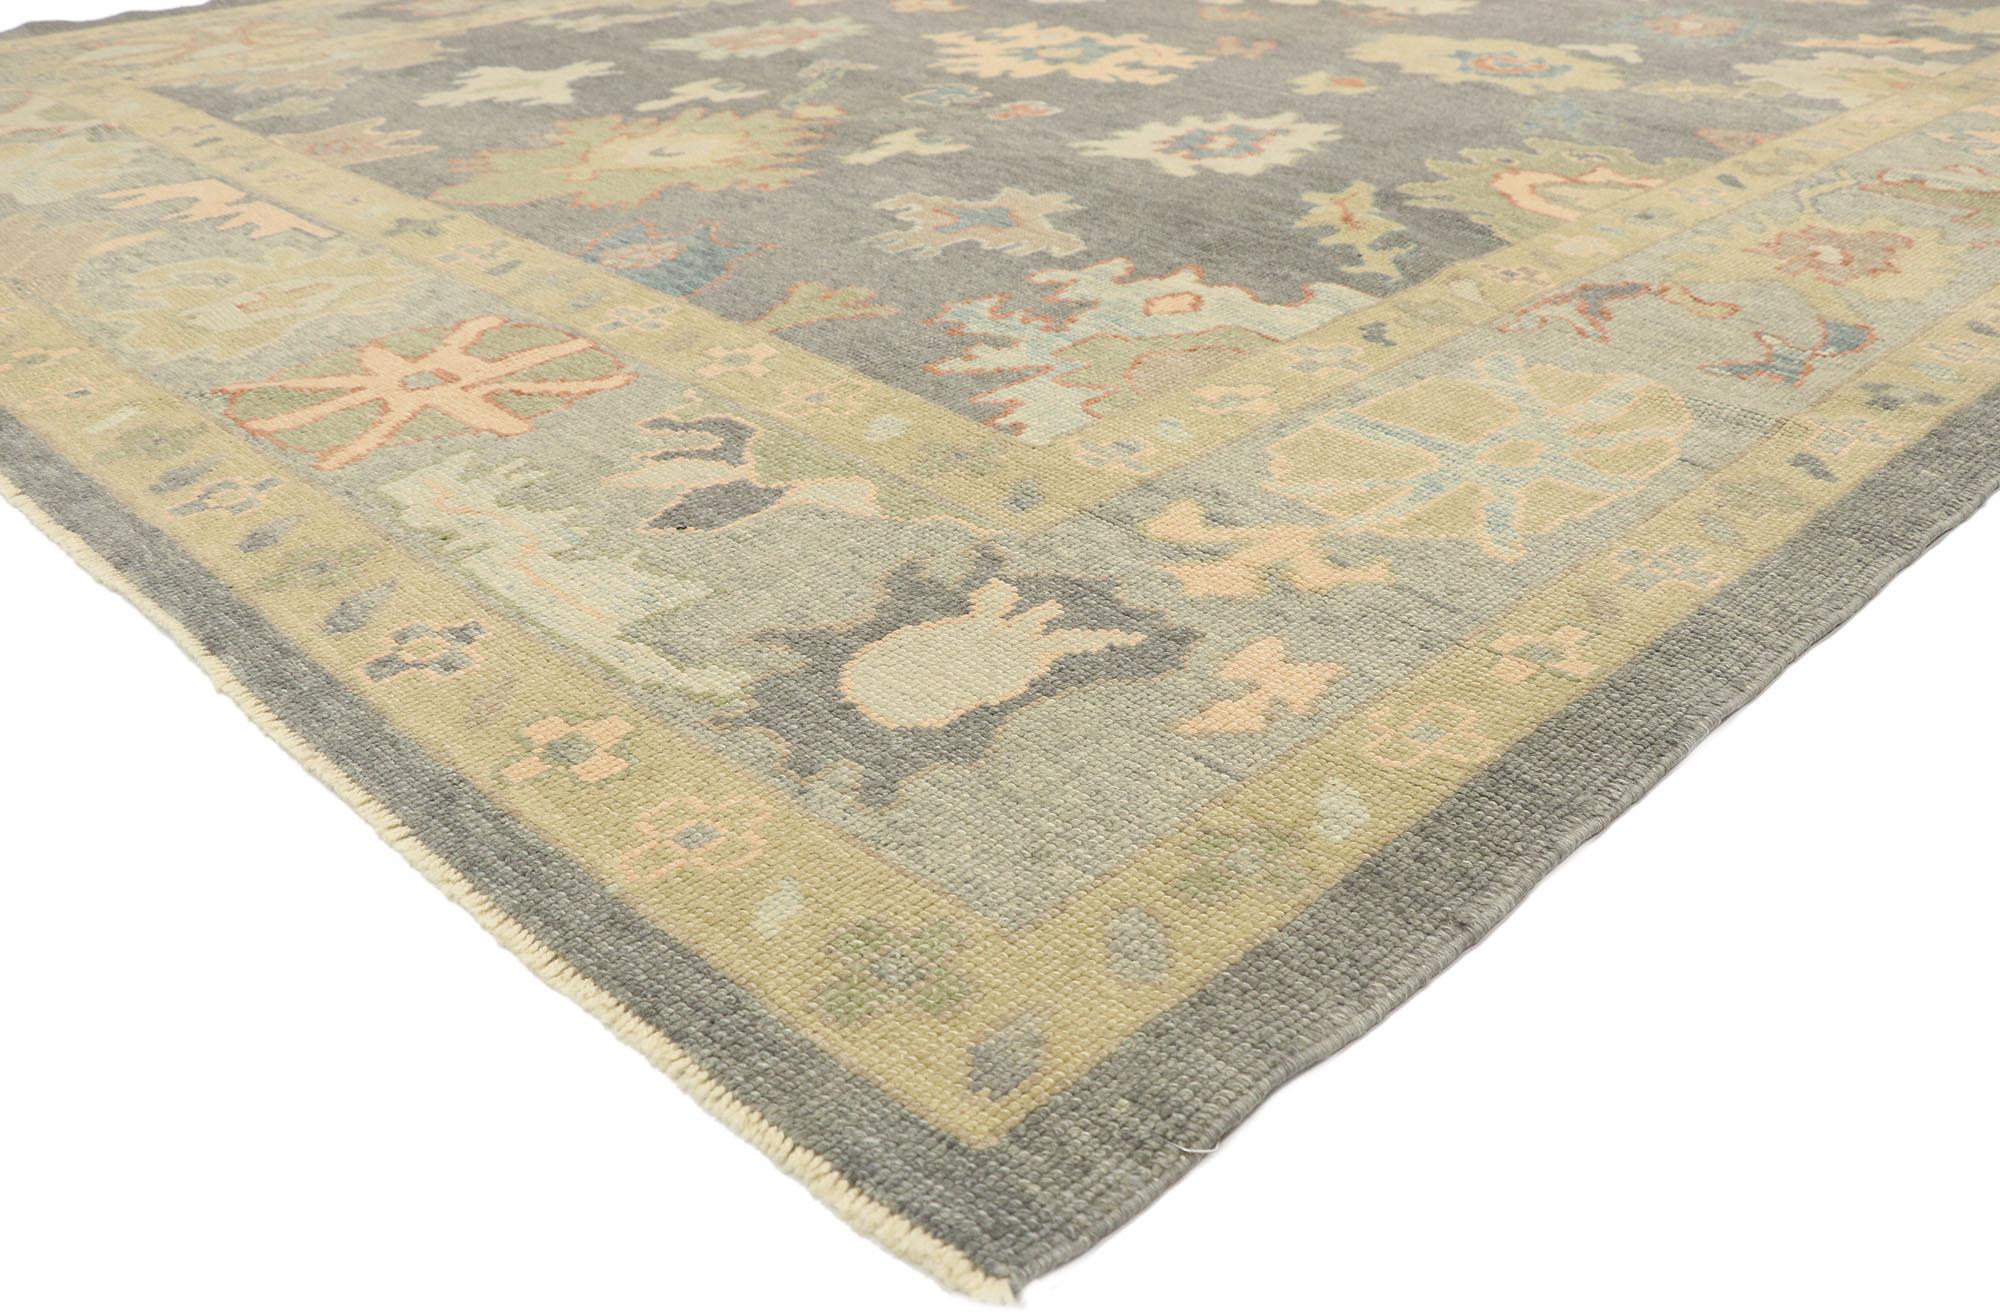 52944 contemporary Turkish Oushak rug with Modern Transitional style 09'02 x 11'10. Blending elements from the modern world with subdued colors, this hand knotted wool contemporary Turkish Oushak rug will boost the coziness factor in nearly any